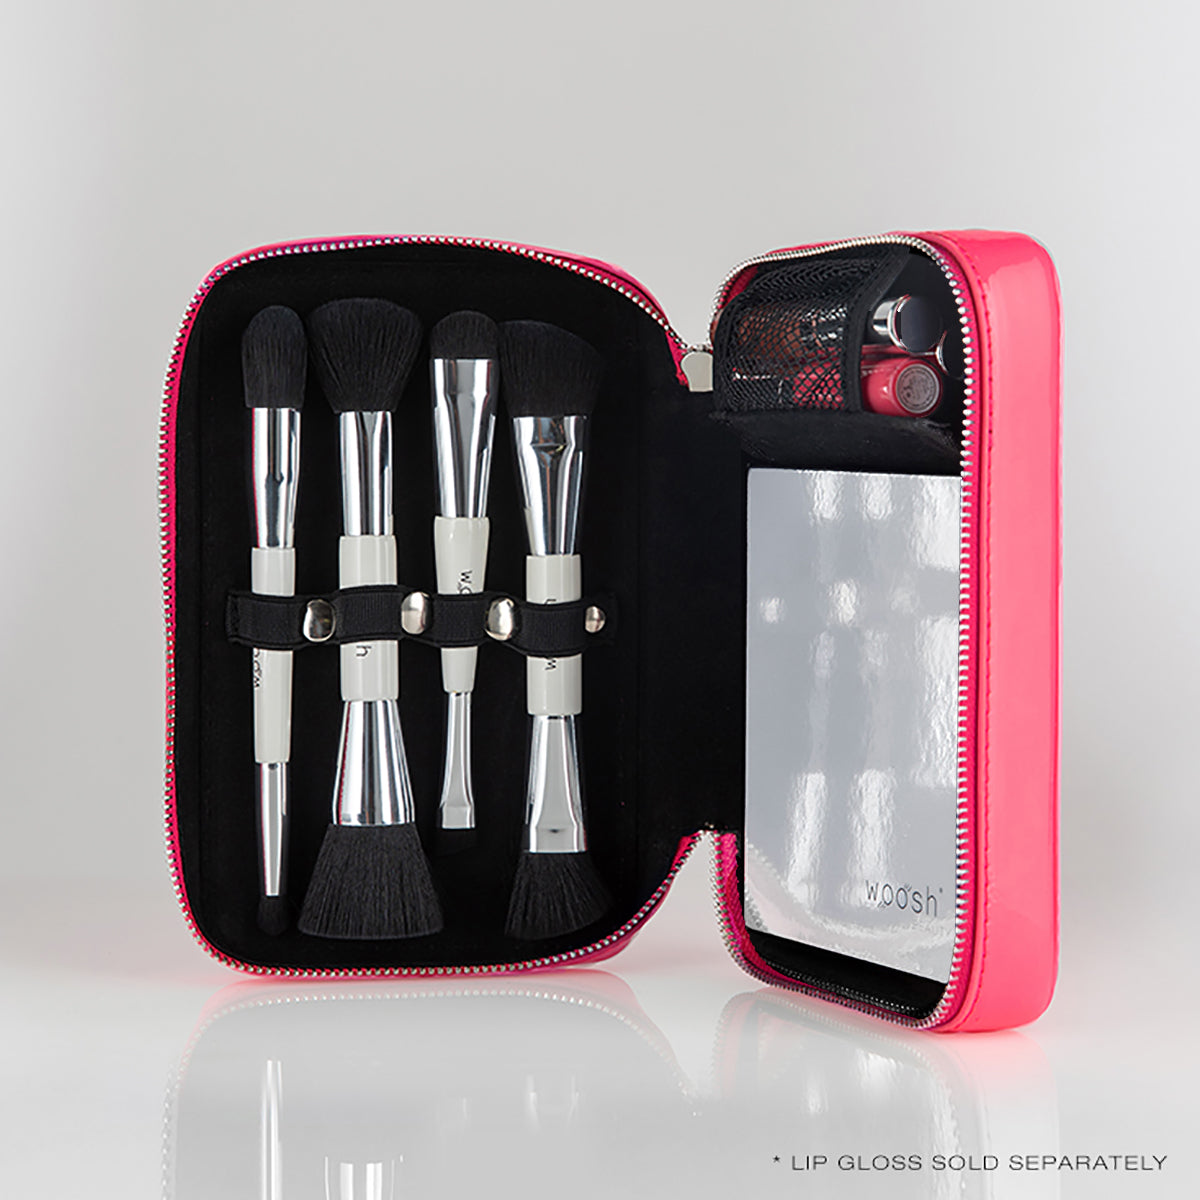 Black Fold Out Case can hold: 4 essential brushes, 3 lip glosses, and 1 fold out face palette